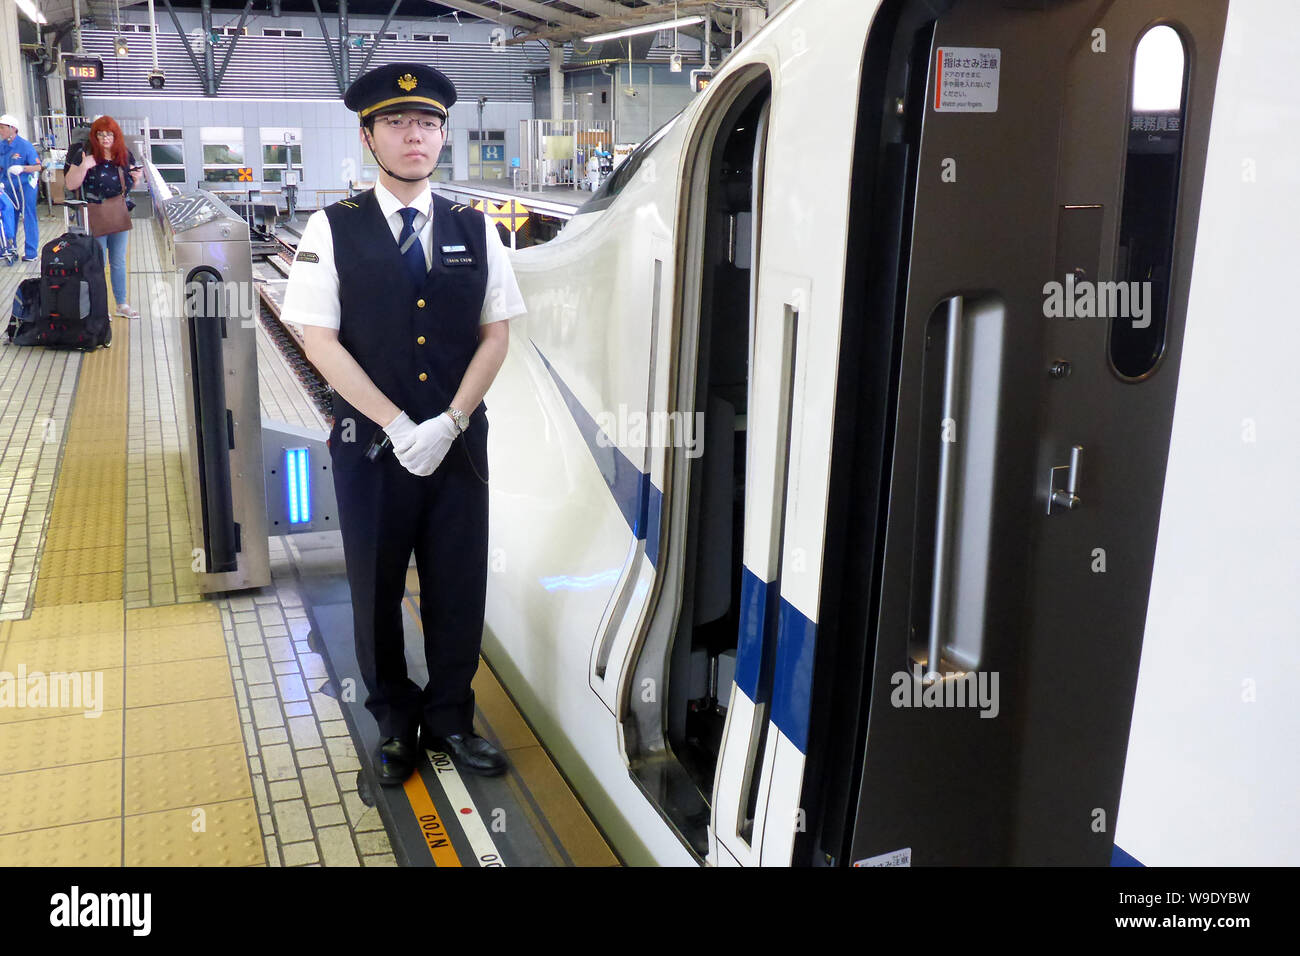 Tokio, Japan. 18th May, 2018. A train attendant is standing next to a Shinkansen Express at the Tokyo railway station at a boarding security system that separates the train from the track bed and thus secures it. Falls into the track bed are not possible in this way. There are similar systems in around 50 other cities around the world, some of which have been in operation since the 1990s - for example in Moscow, London and Barcelona. Credit: Peter Gercke/dpa-Zentralbild/ZB/dpa/Alamy Live News Stock Photo